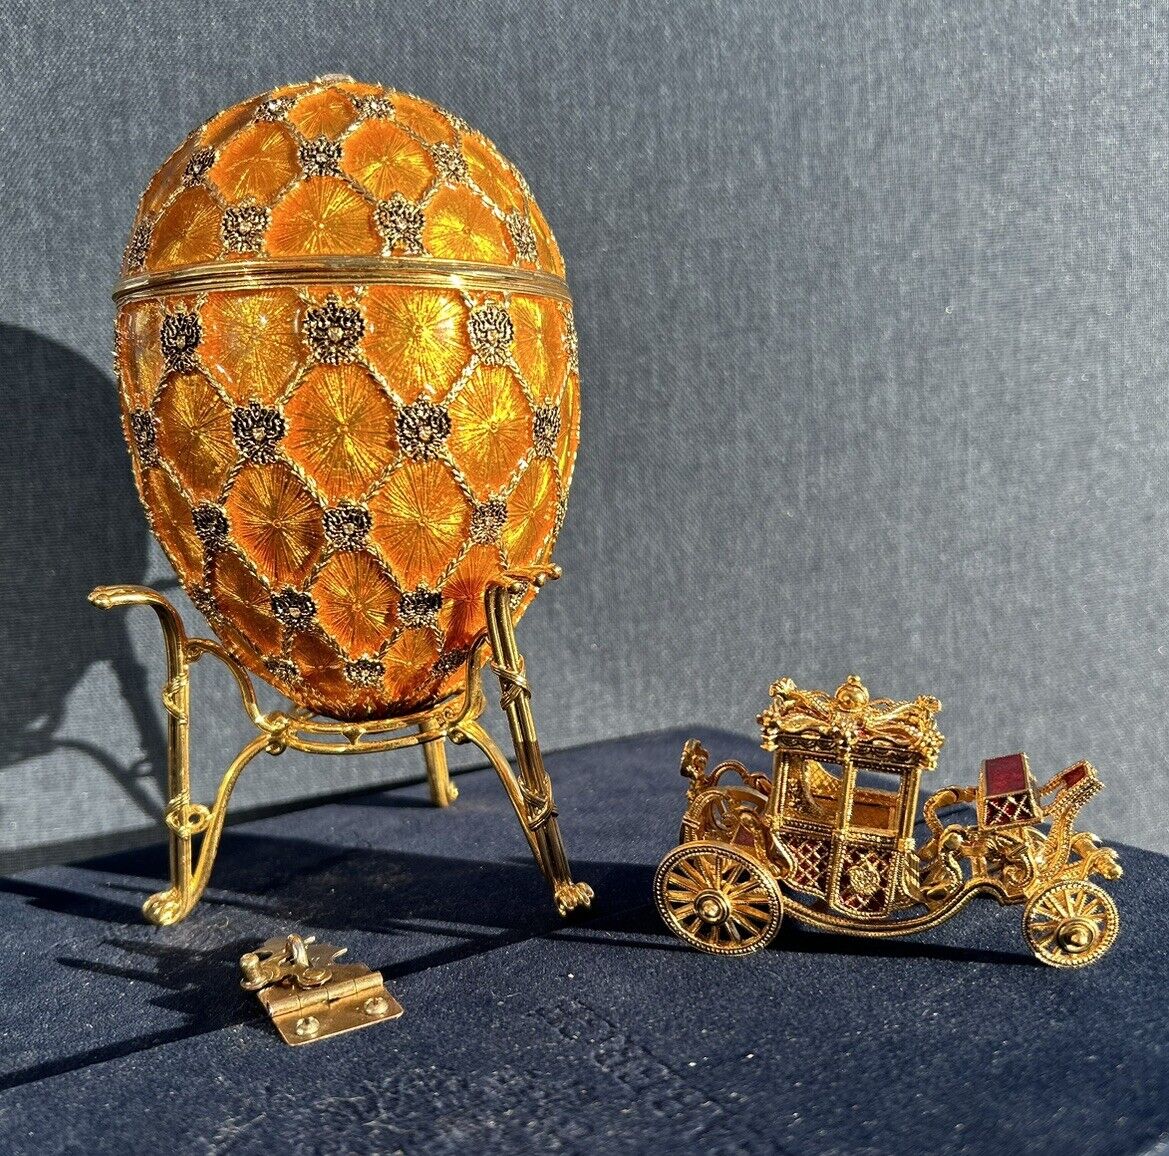 Fabergé limited-edition official Imperial Coronation egg